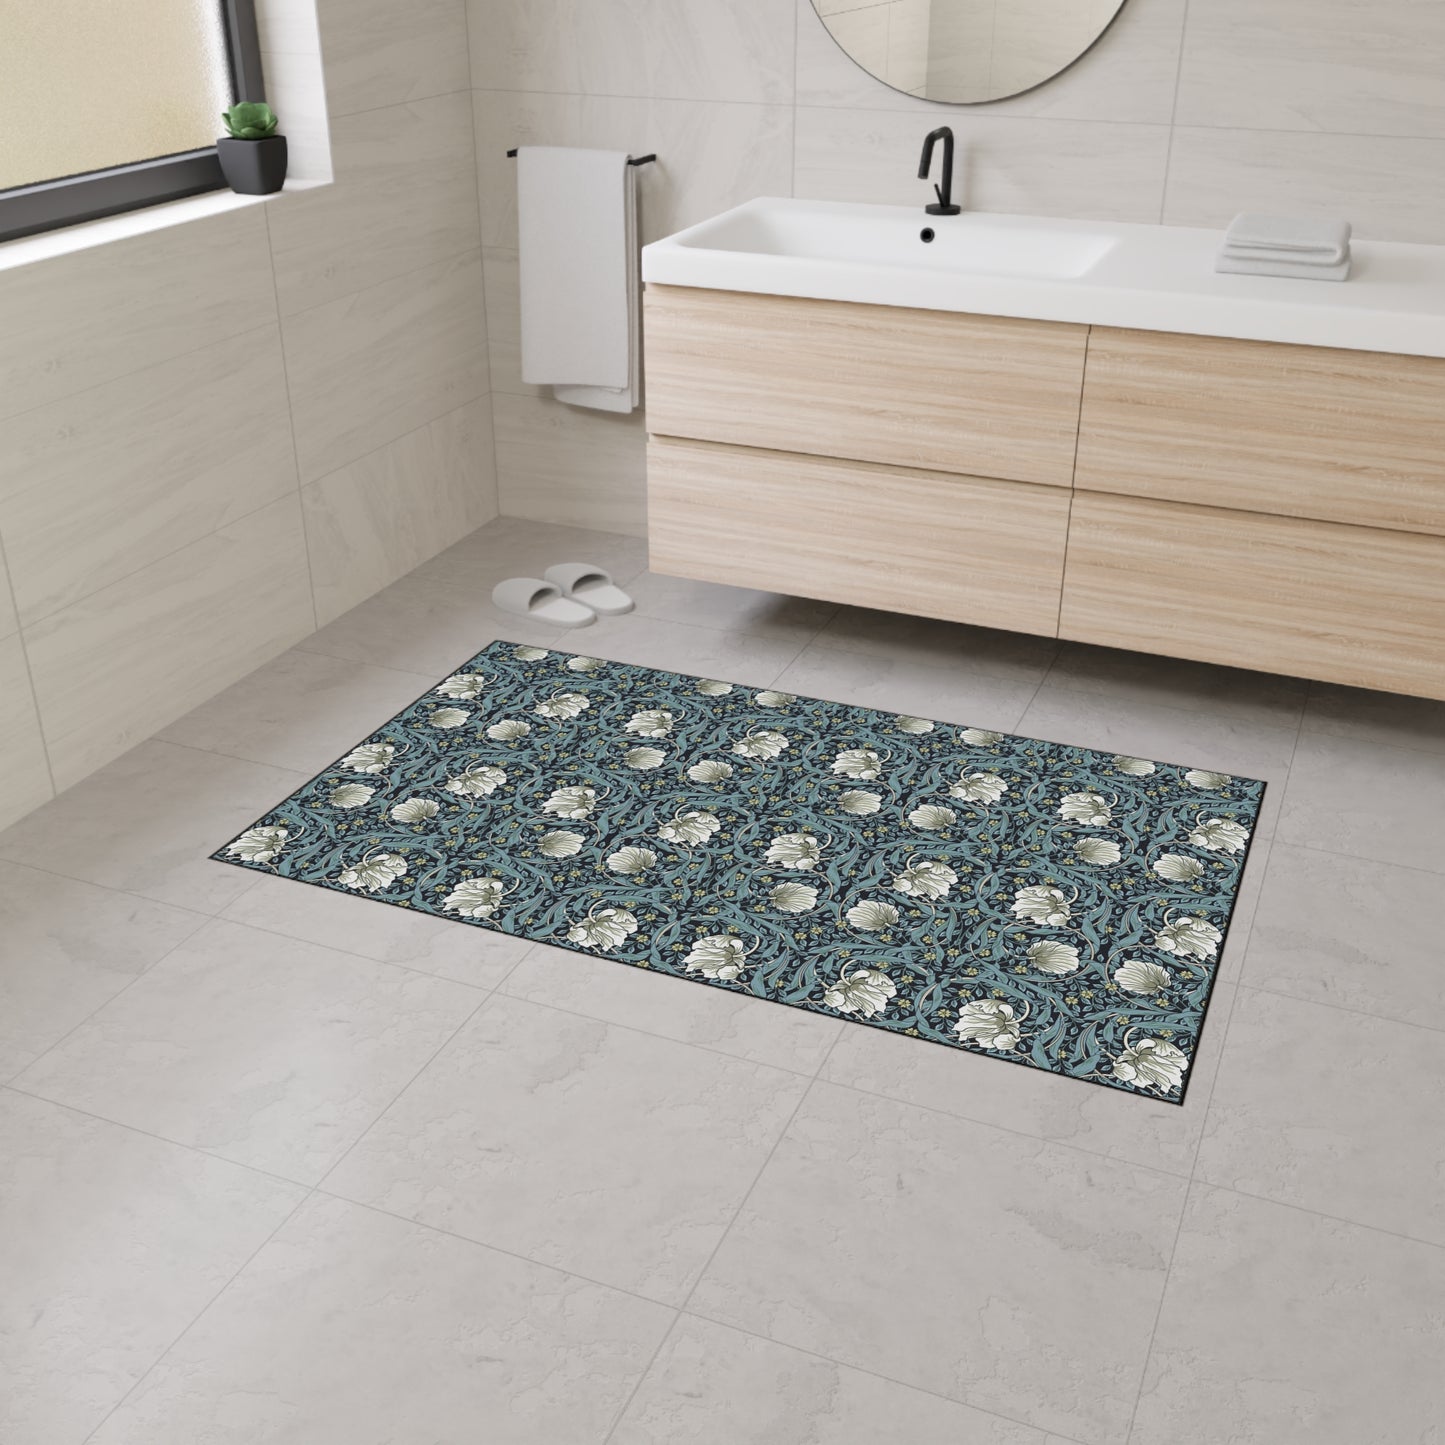 william-morris-co-heavy-duty-floor-mat-pimpernel-collection-slate-16